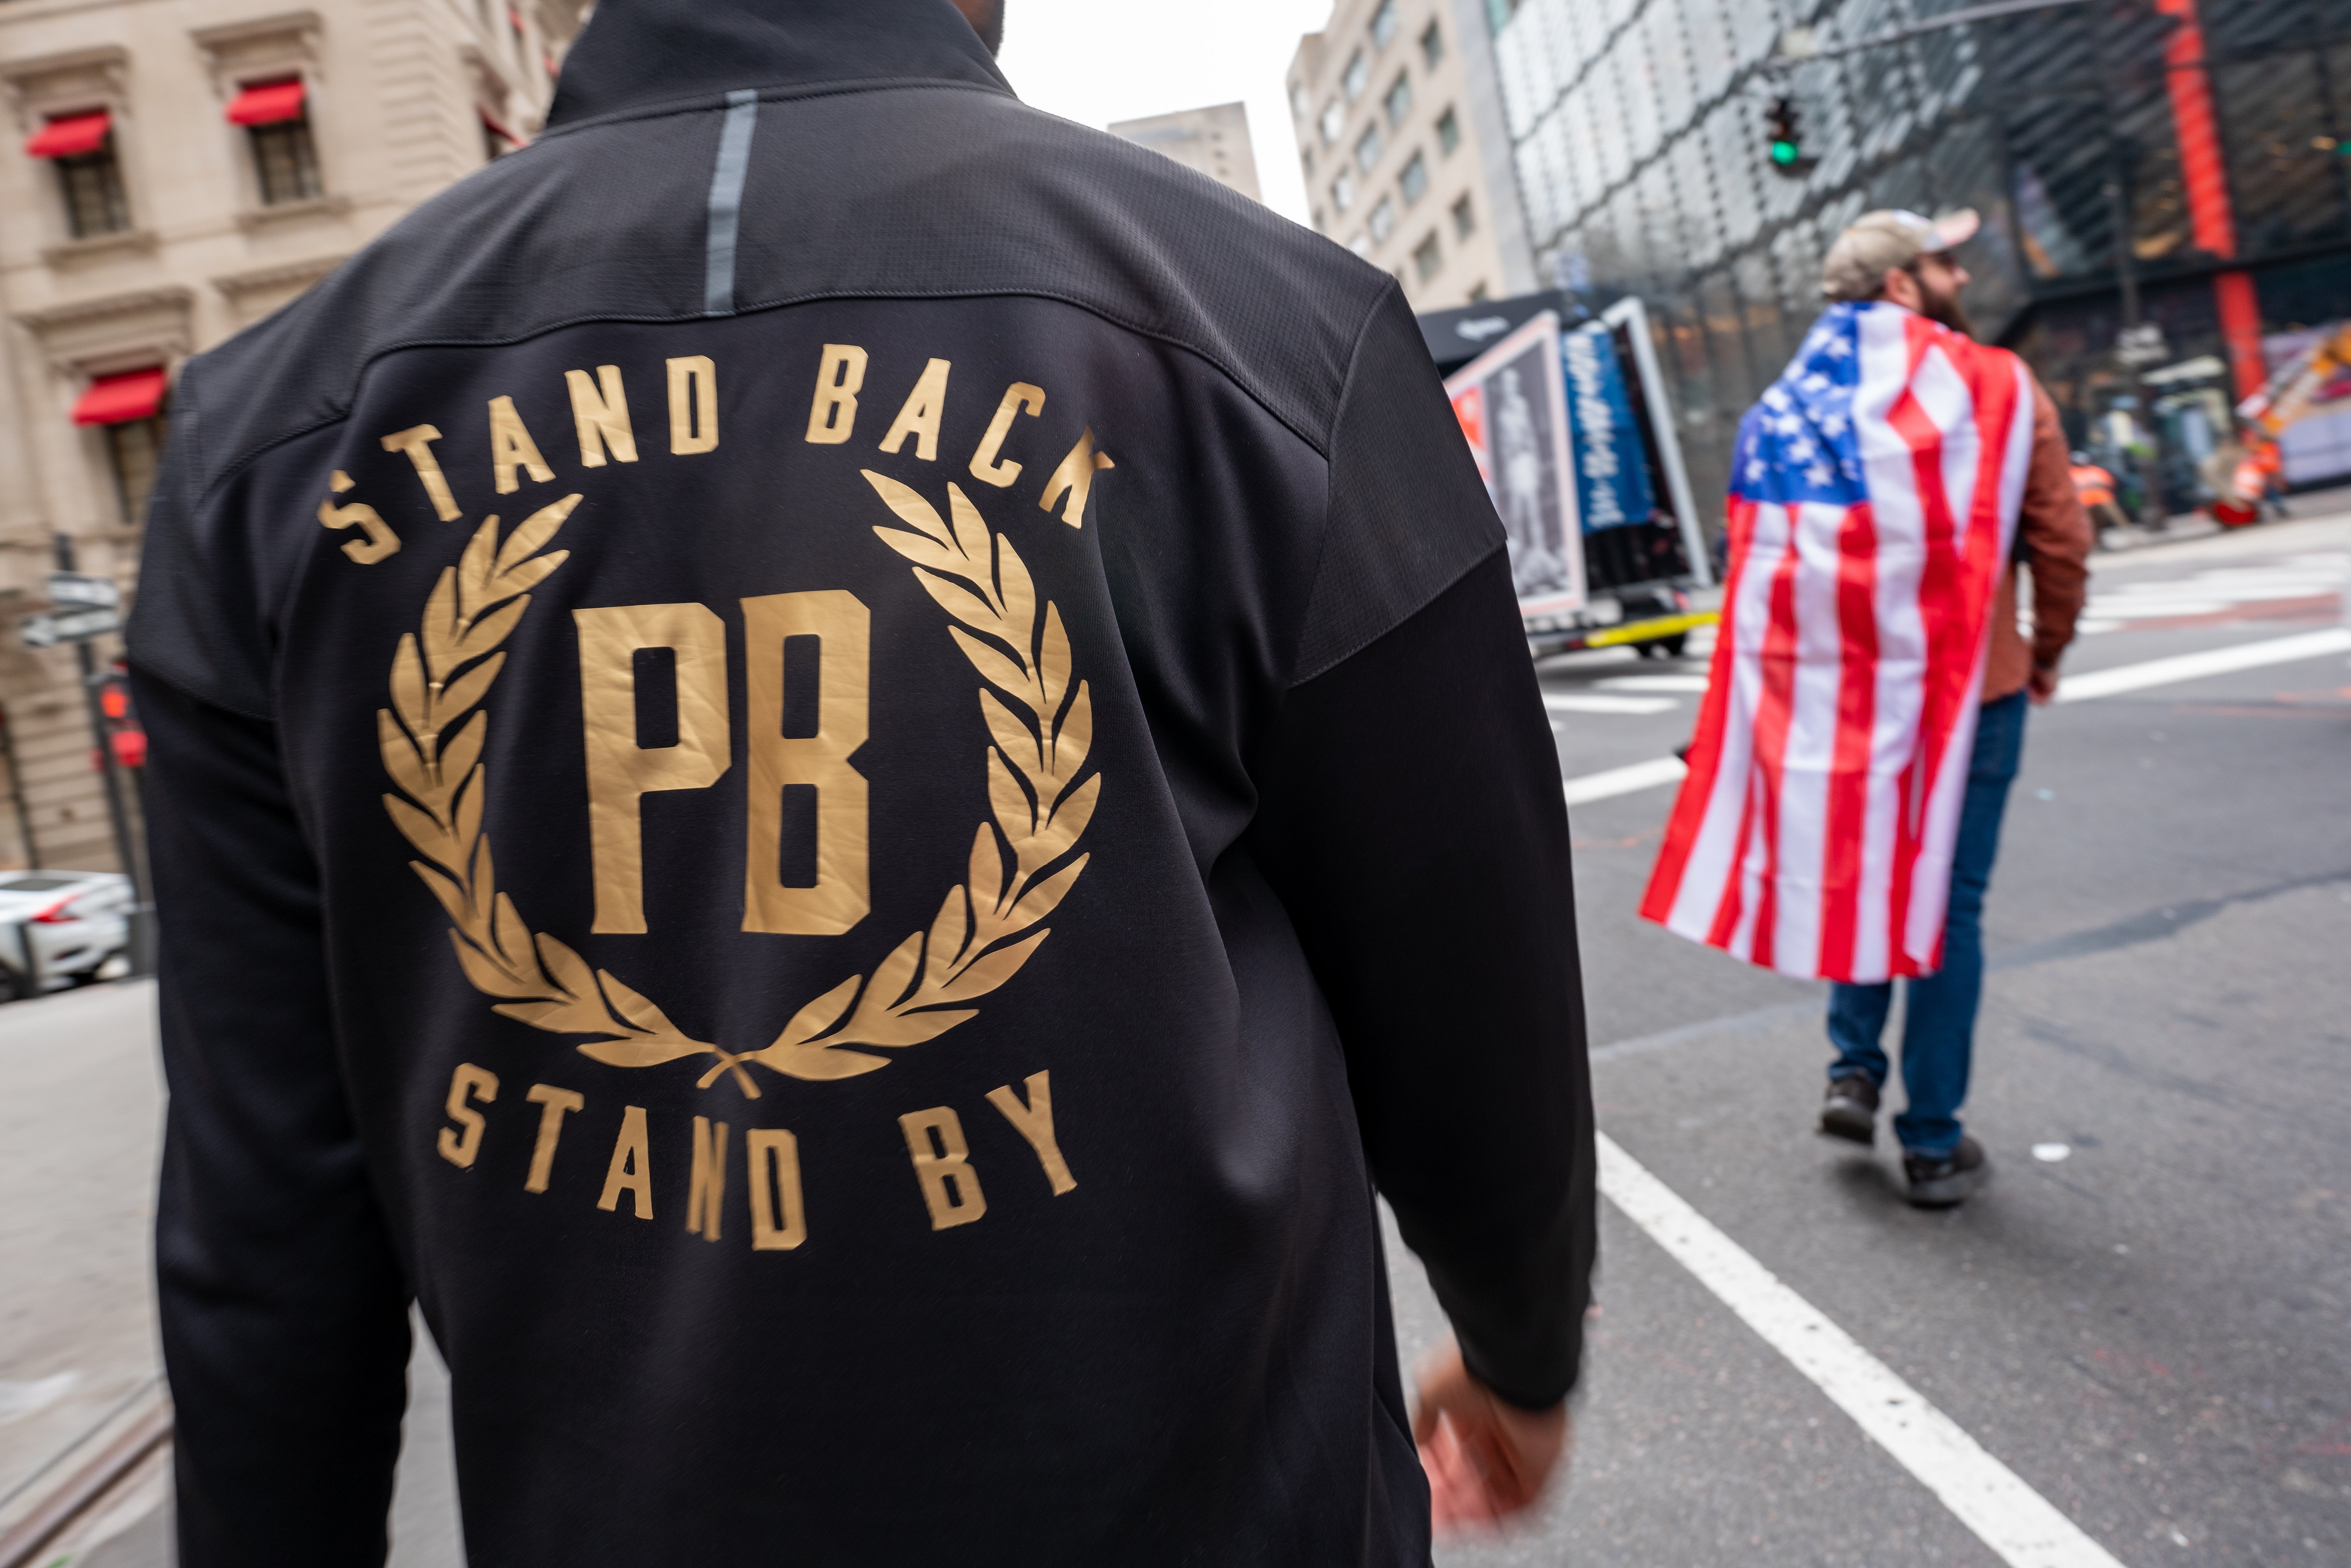 A member of the Proud Boys is pictured wearing a jacket that reads Stand Back Stand By during a march and rally for Donald Trump in New York City in October 2020